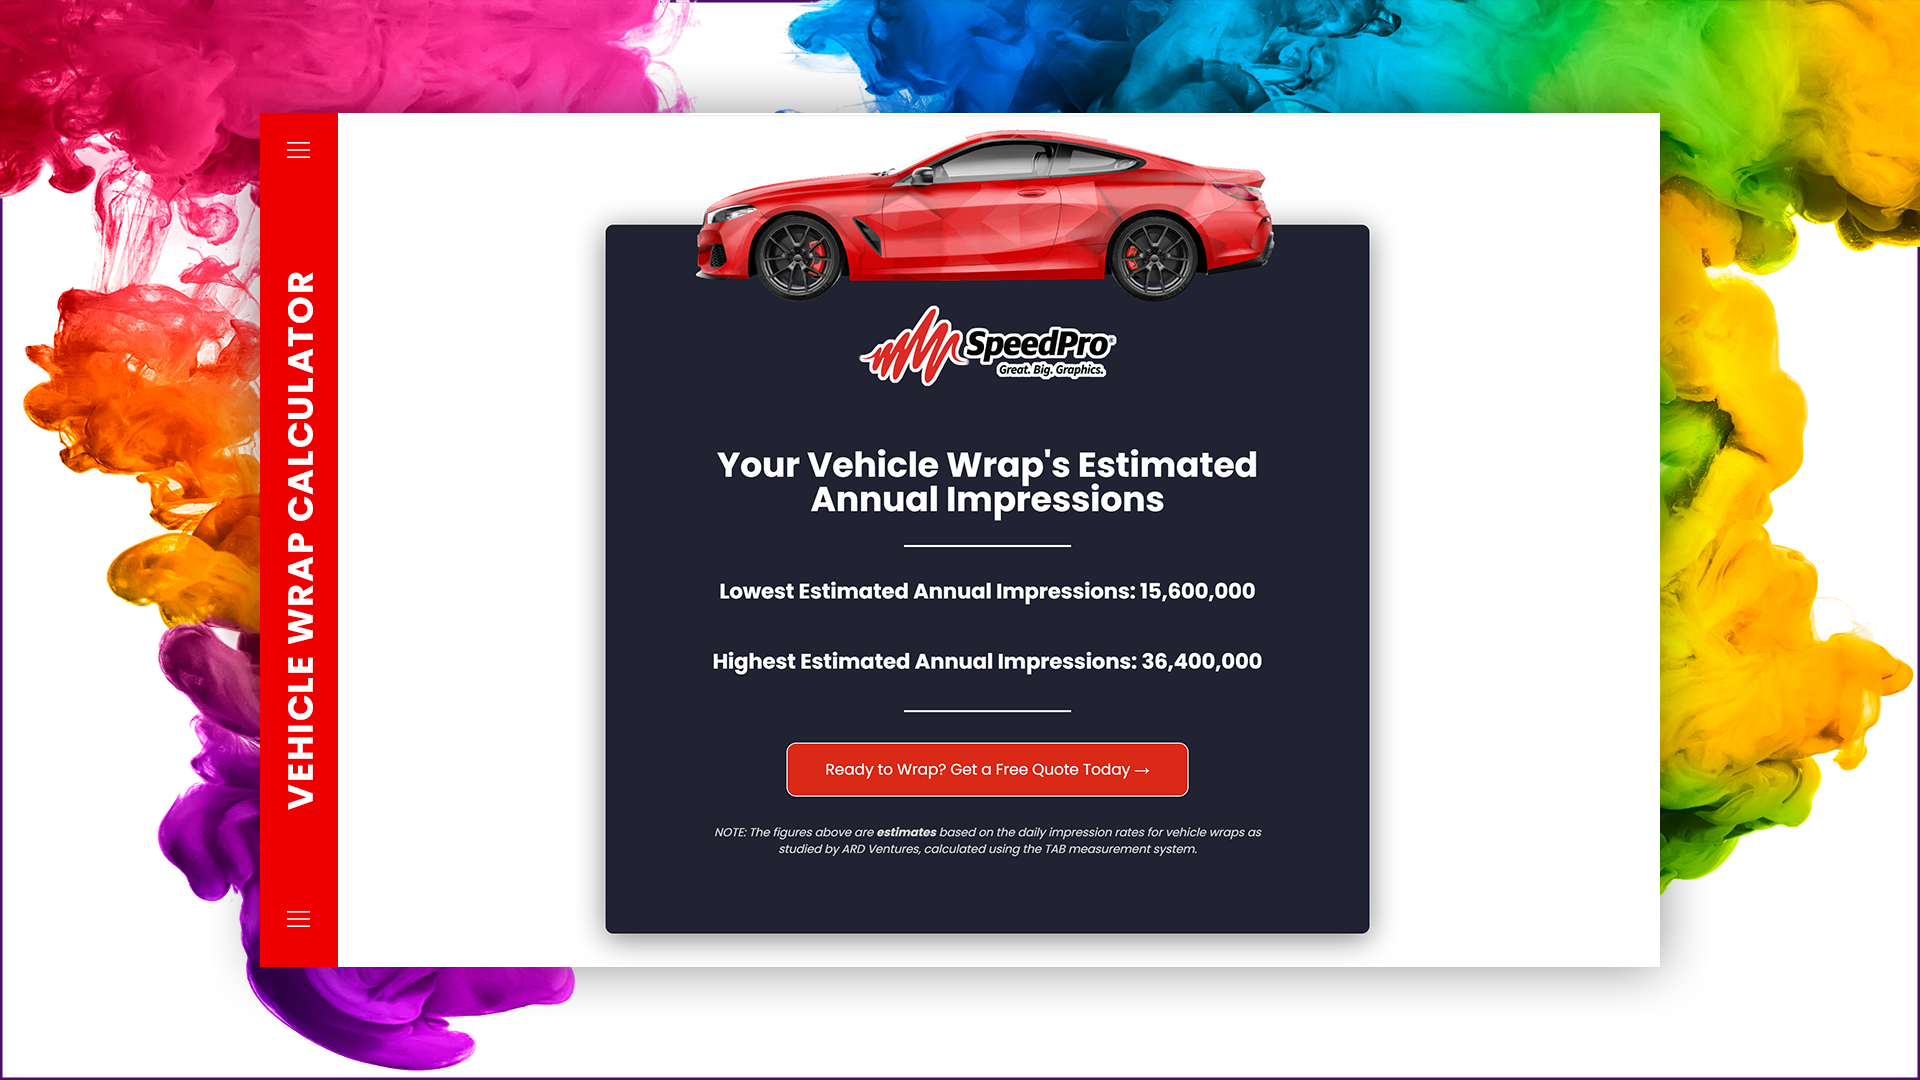 Vehicle Wrap Calculator by SpeedPro Calculate Your Annual Impressions